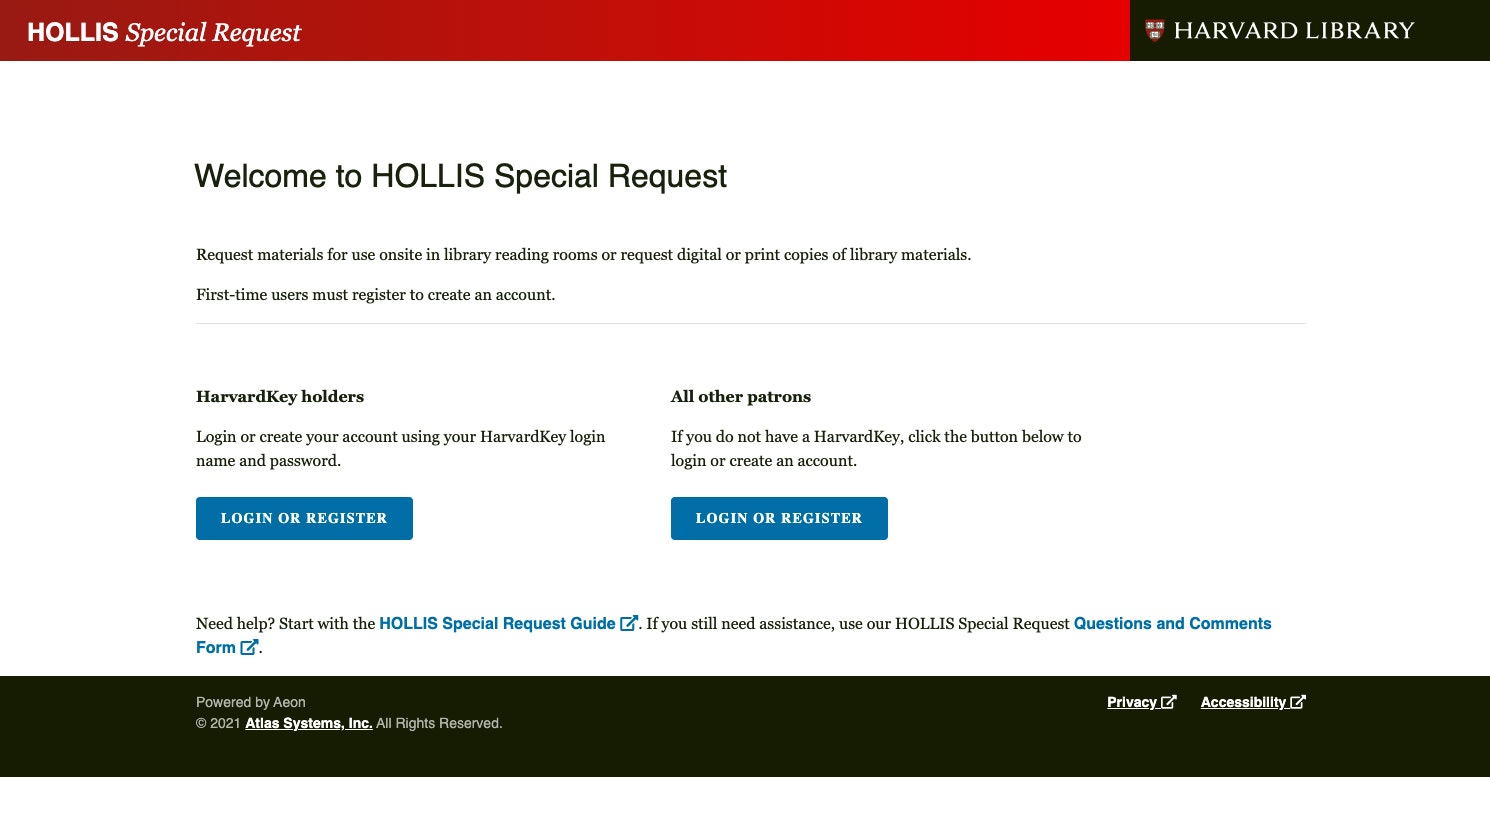 A screenshot of the HOLLIS Special Request page